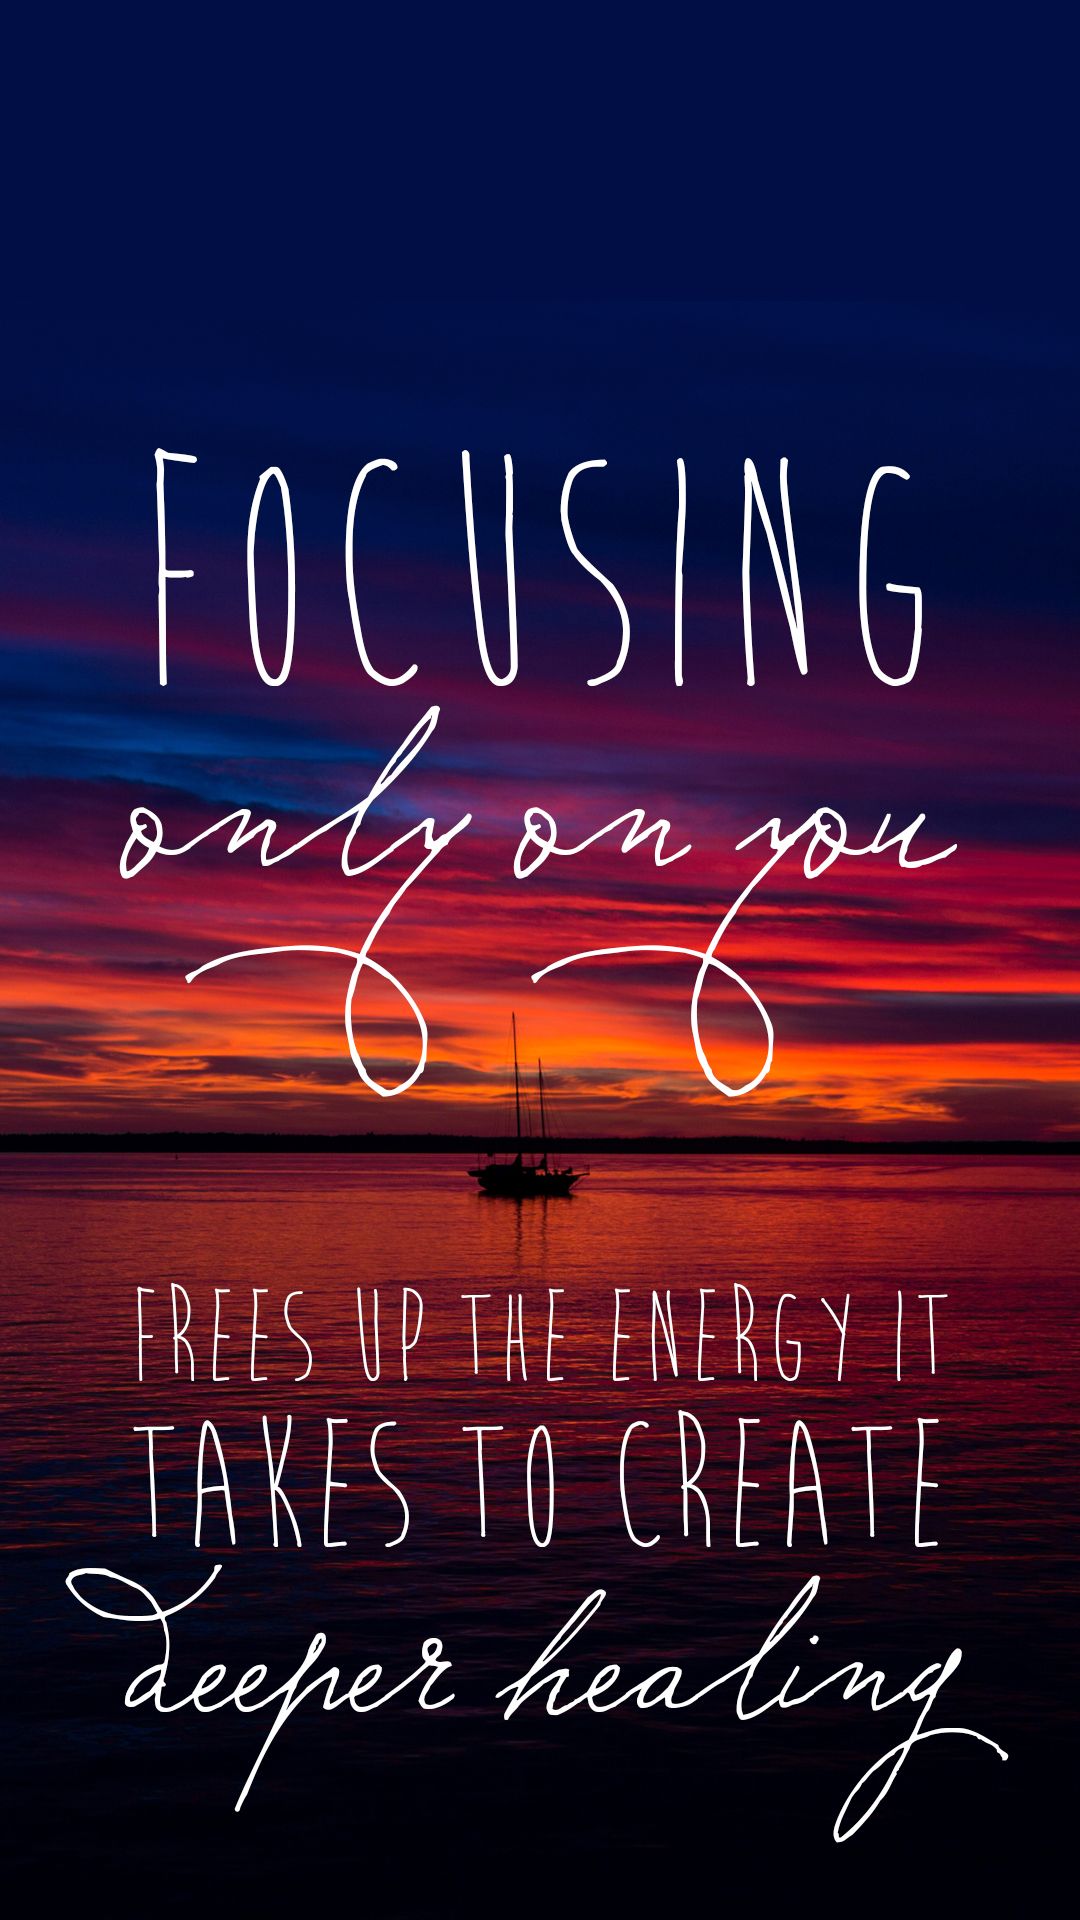 Positive Energy Background Images HD Pictures and Wallpaper For Free  Download  Pngtree